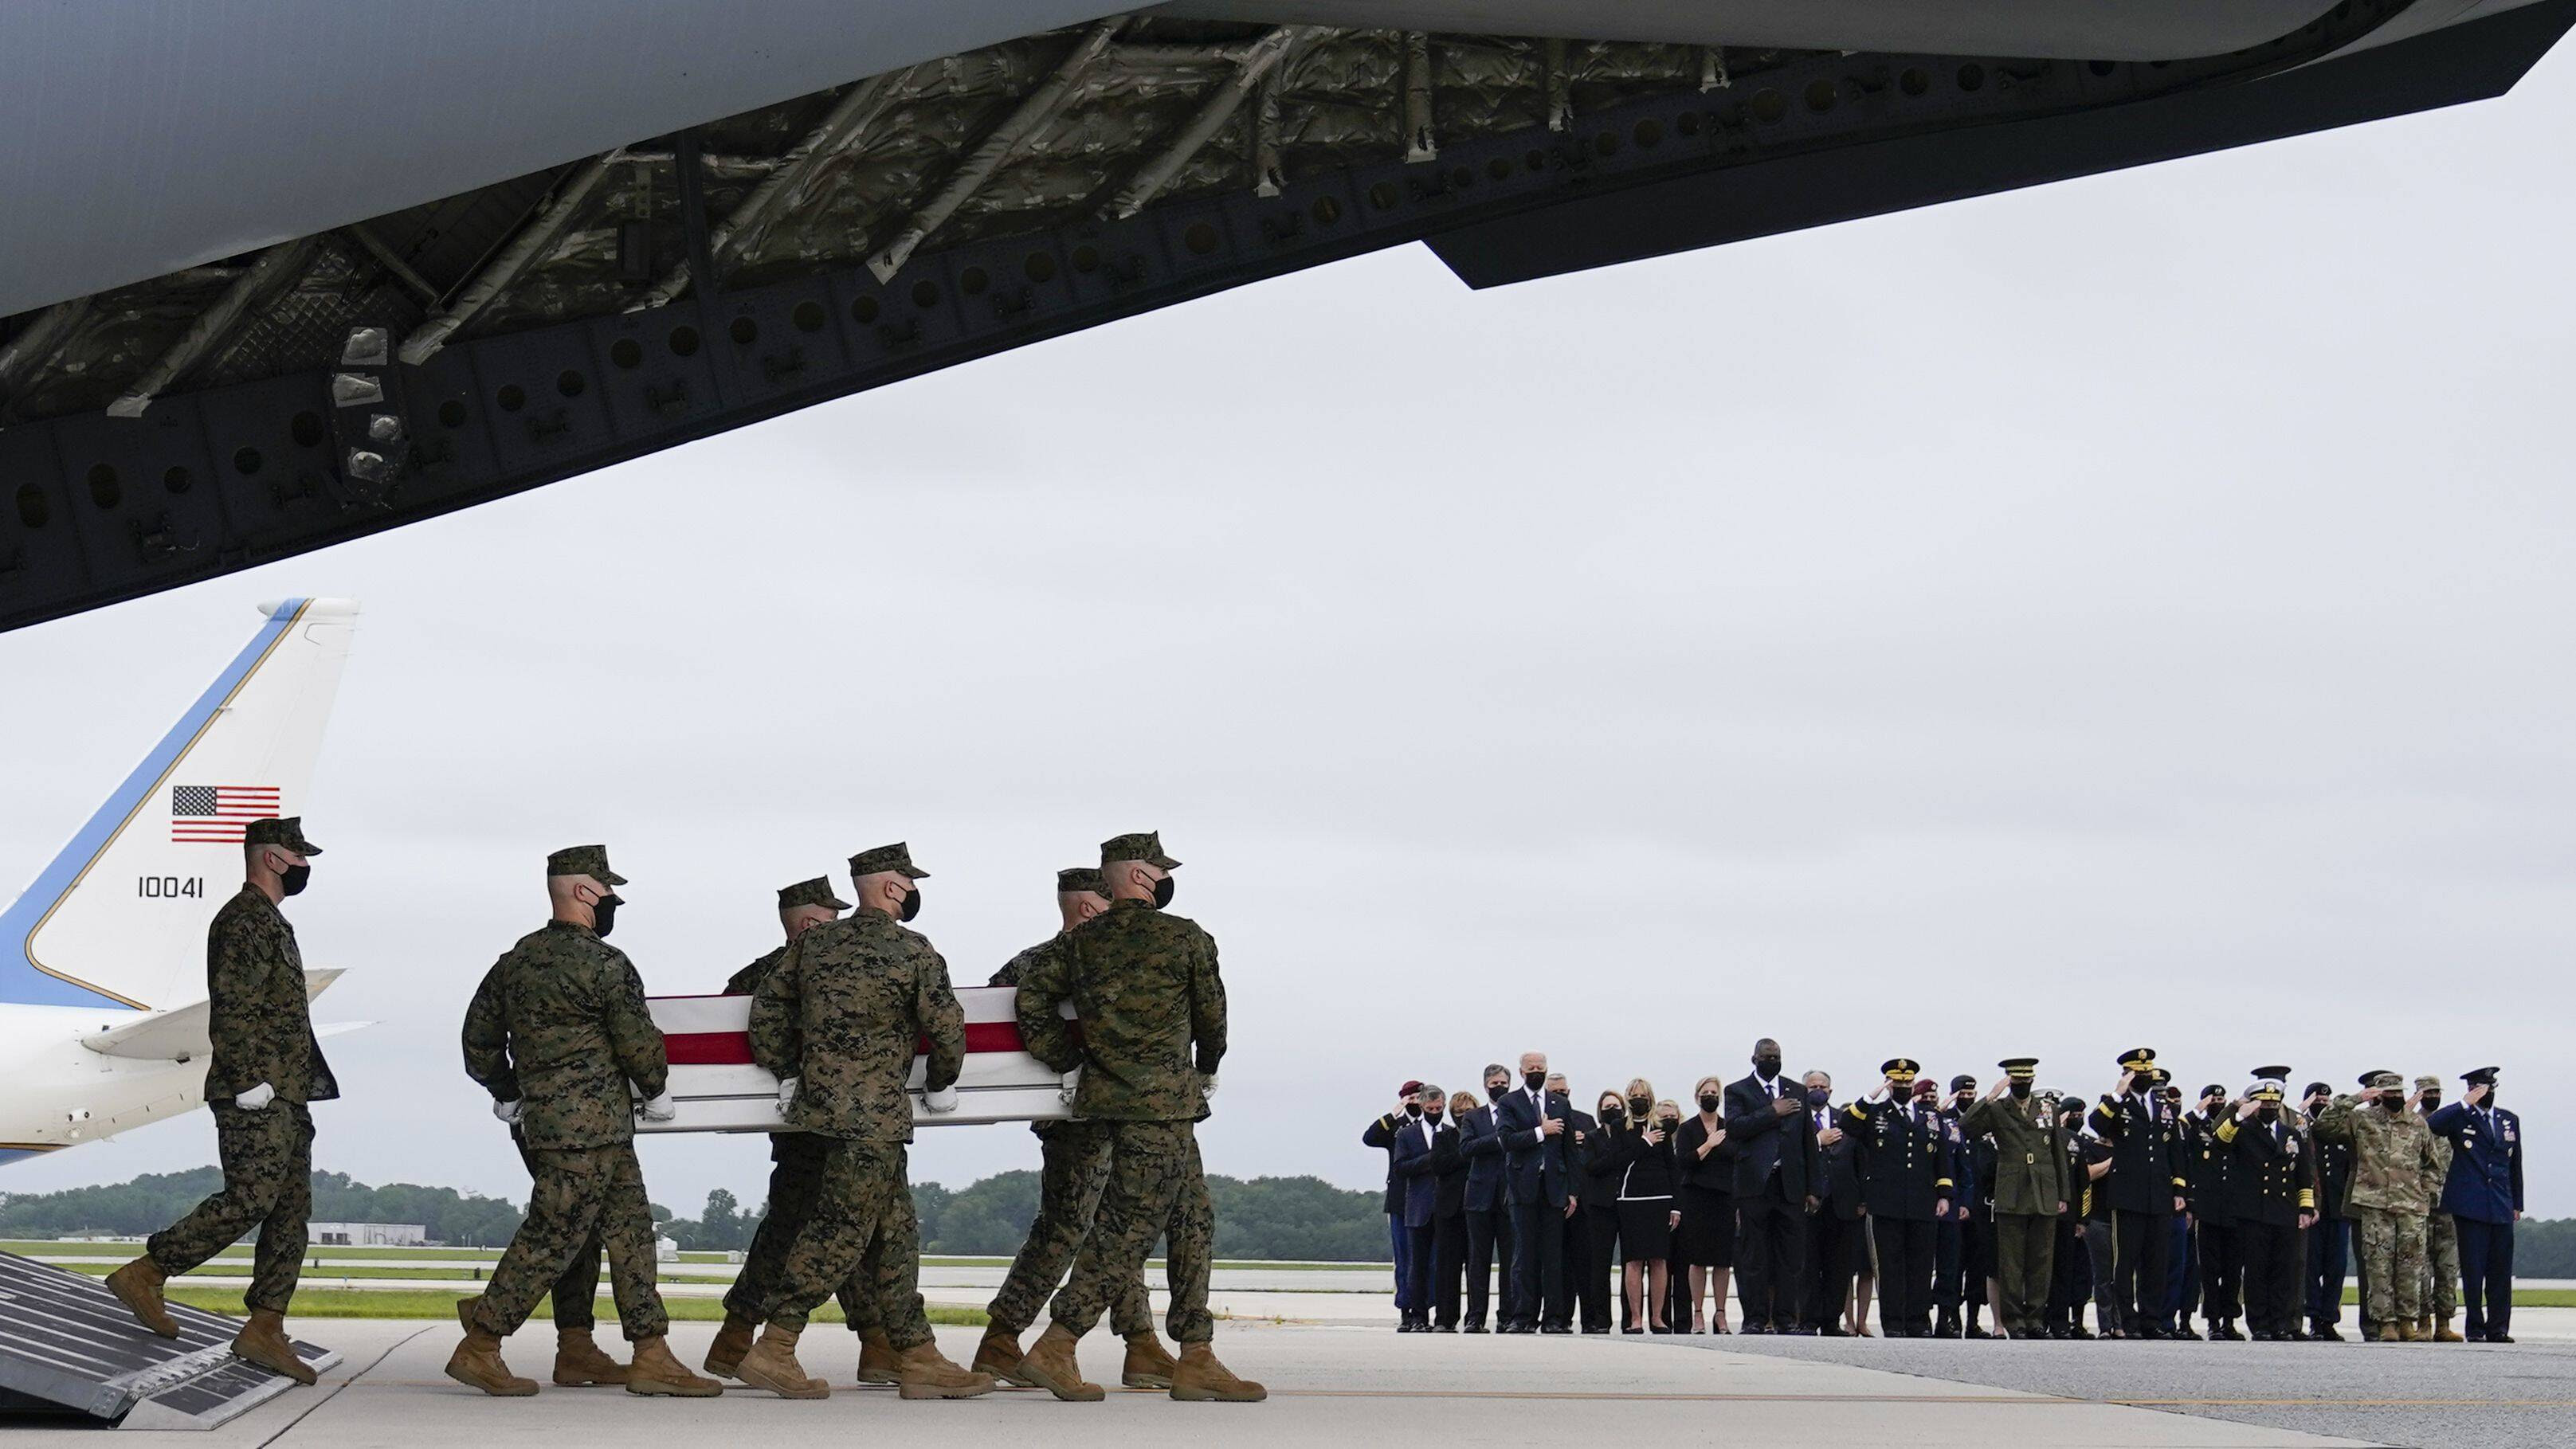 President Biden, first lady Jill Biden and others watch as a Marine Corps team carries the remains of Marine Corps Lance Cpl. Jared M. Schmitz, 20, during a casualty return on Aug. 29 at Dover Air Force Base in Delaware. (Carolyn Kaster/AP)